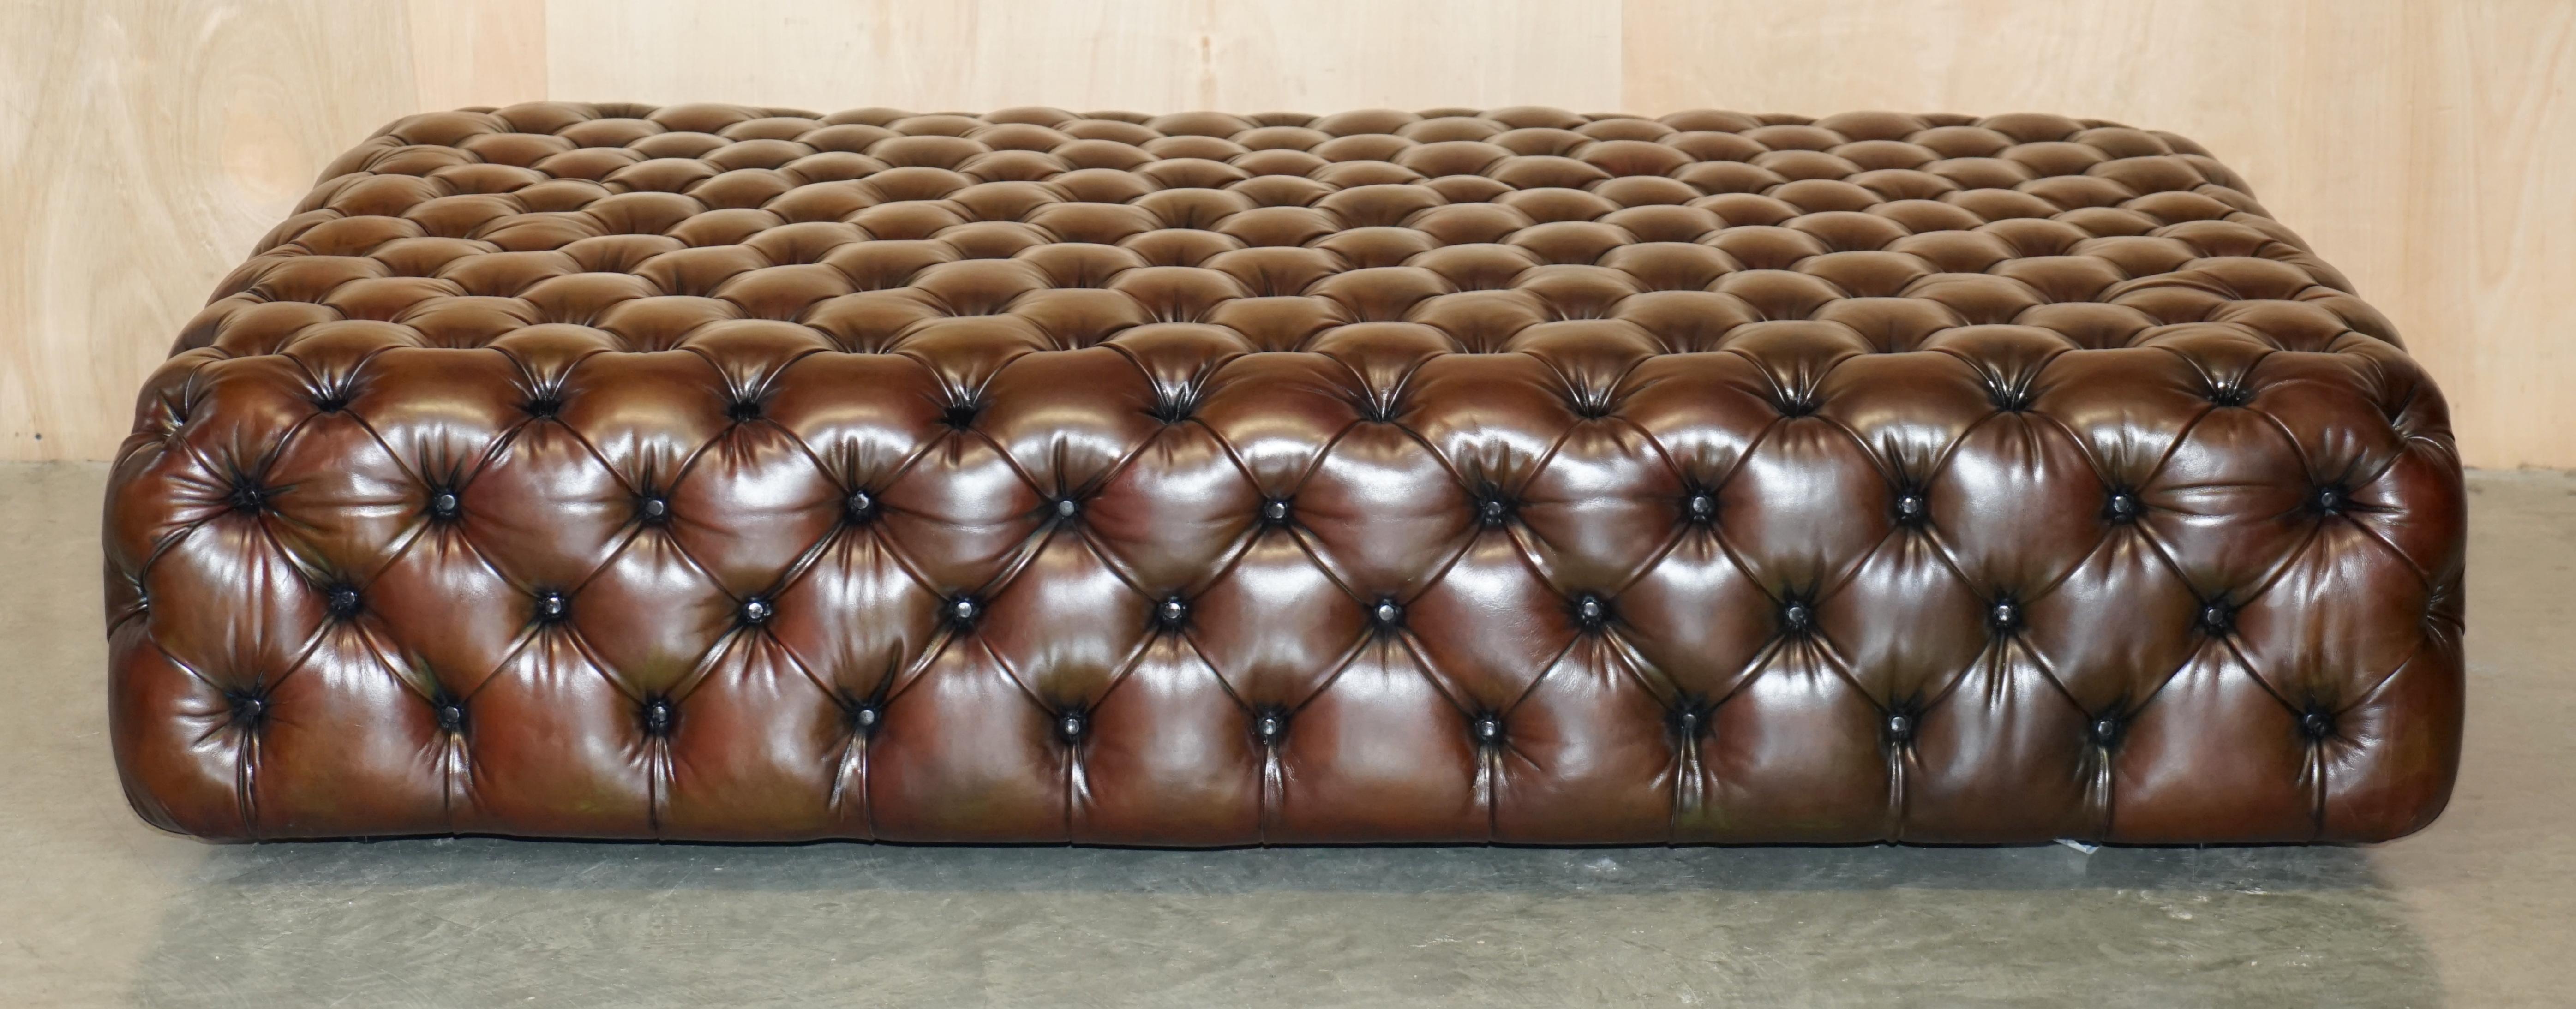 Chesterfield MONUMENTAL GEORGE SMITH RESTORED BROWN LEATHER CHESTERFiELD FOOTSTOOL OTTOMAN For Sale